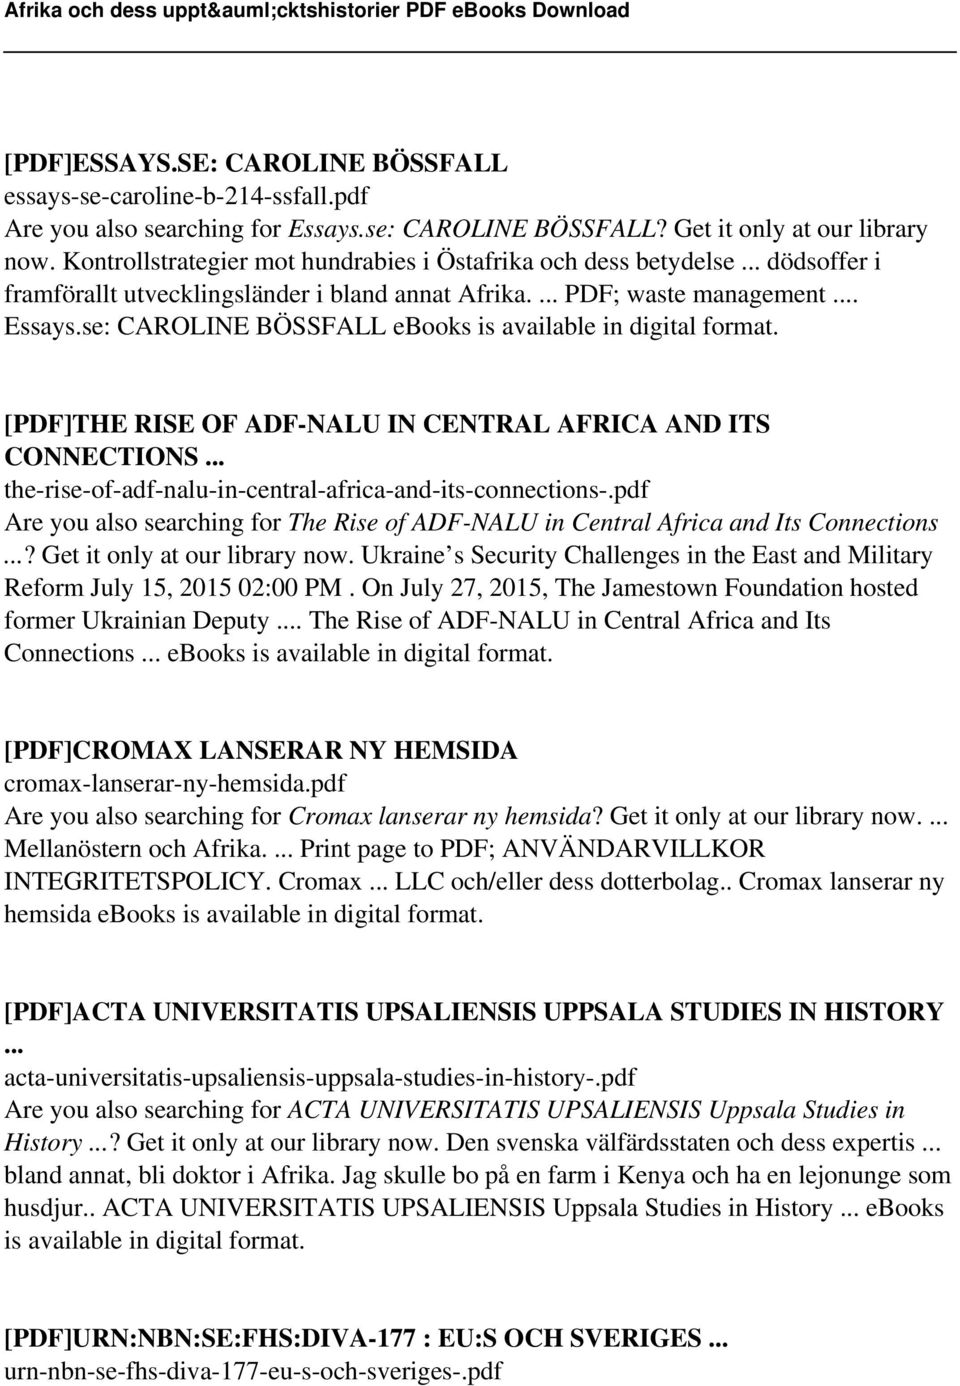 se: CAROLINE BÖSSFALL ebooks is available in digital [PDF]THE RISE OF ADF-NALU IN CENTRAL AFRICA AND ITS CONNECTIONS... the-rise-of-adf-nalu-in-central-africa-and-its-connections-.